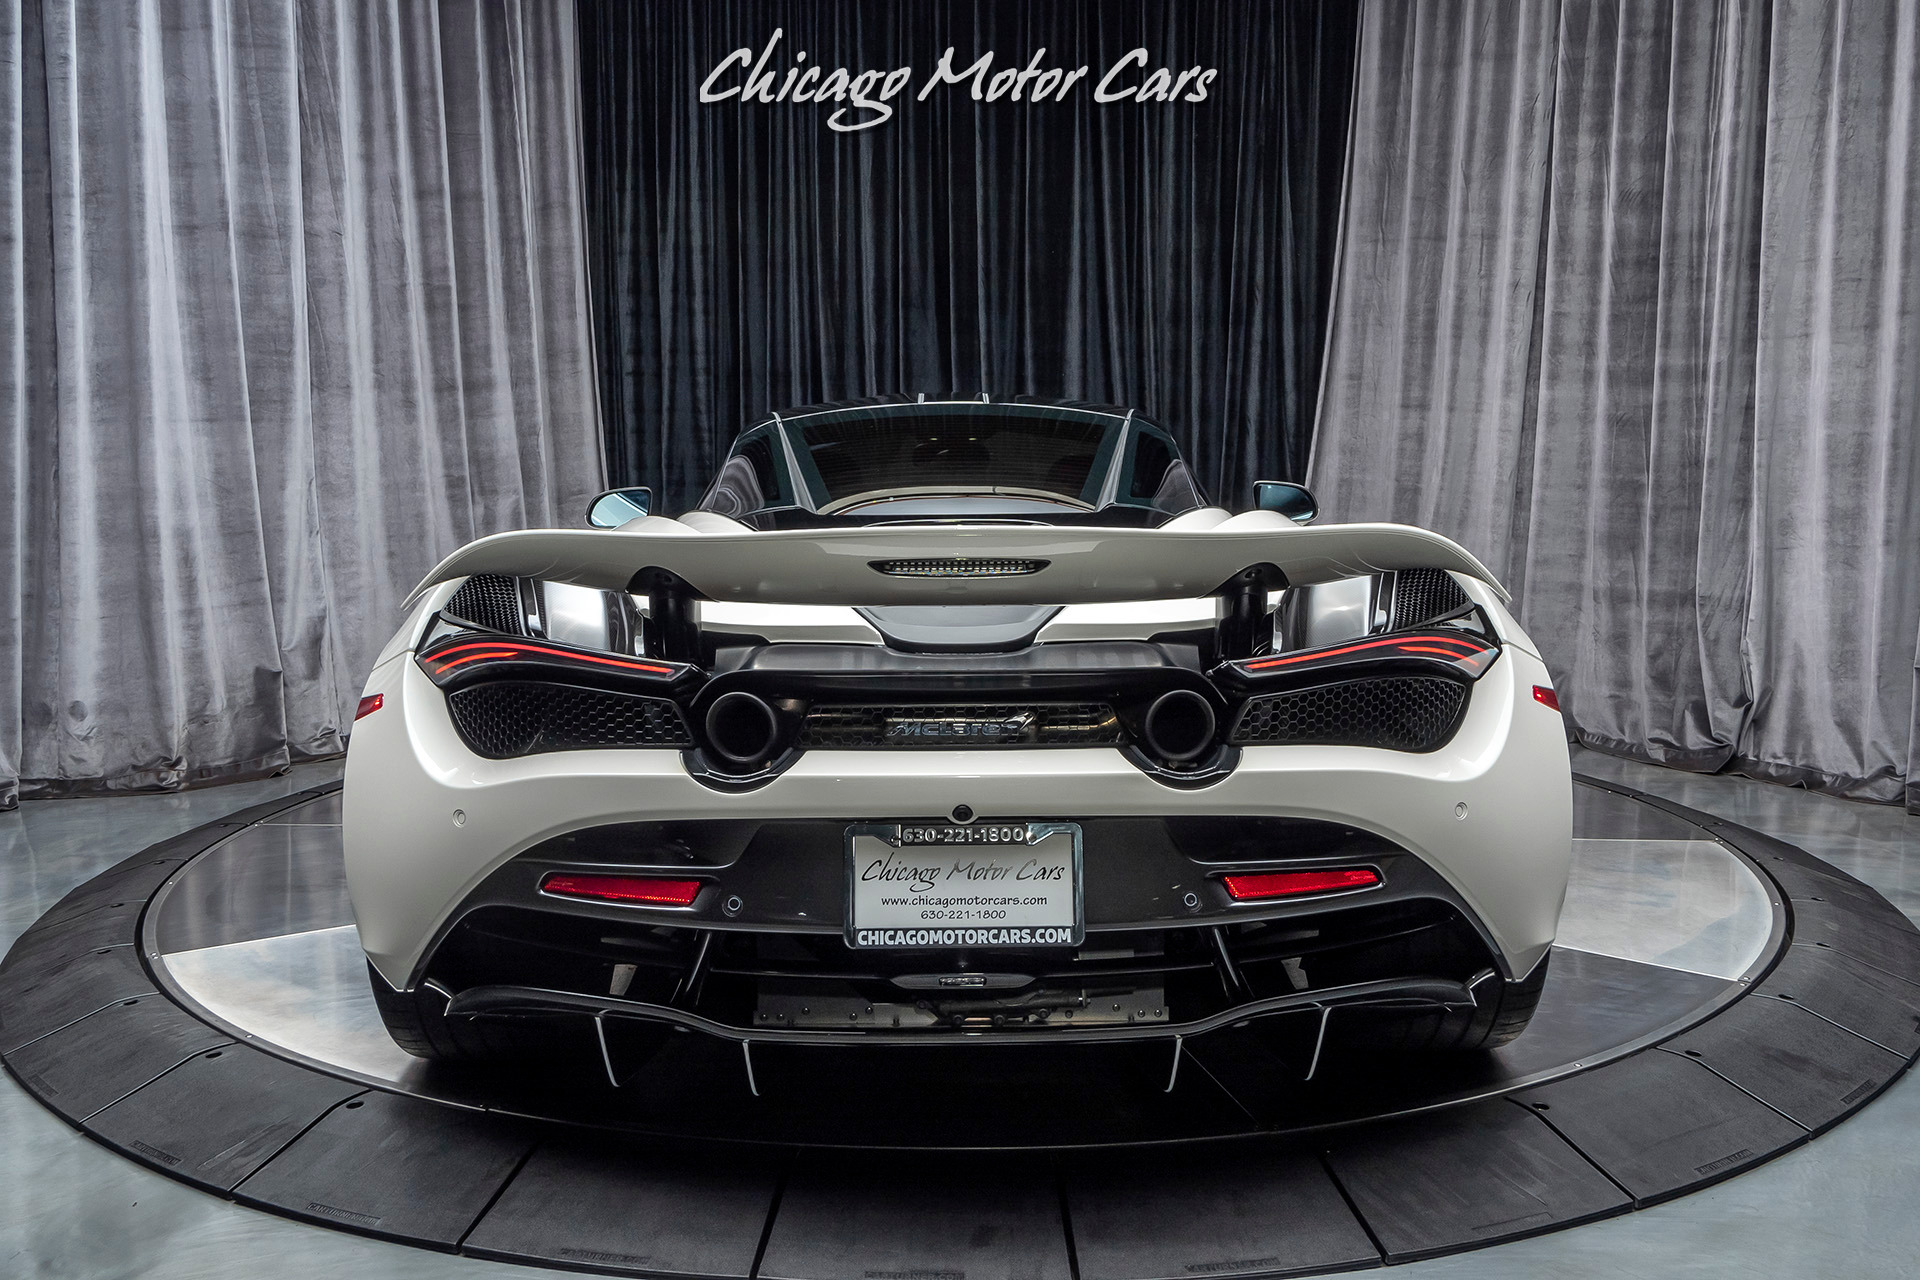 Used-2019-McLaren-720S-Performance-Coupe-Original-MSRP-366k-LOADED-w70K-IN-FACTORY-OPTIONS